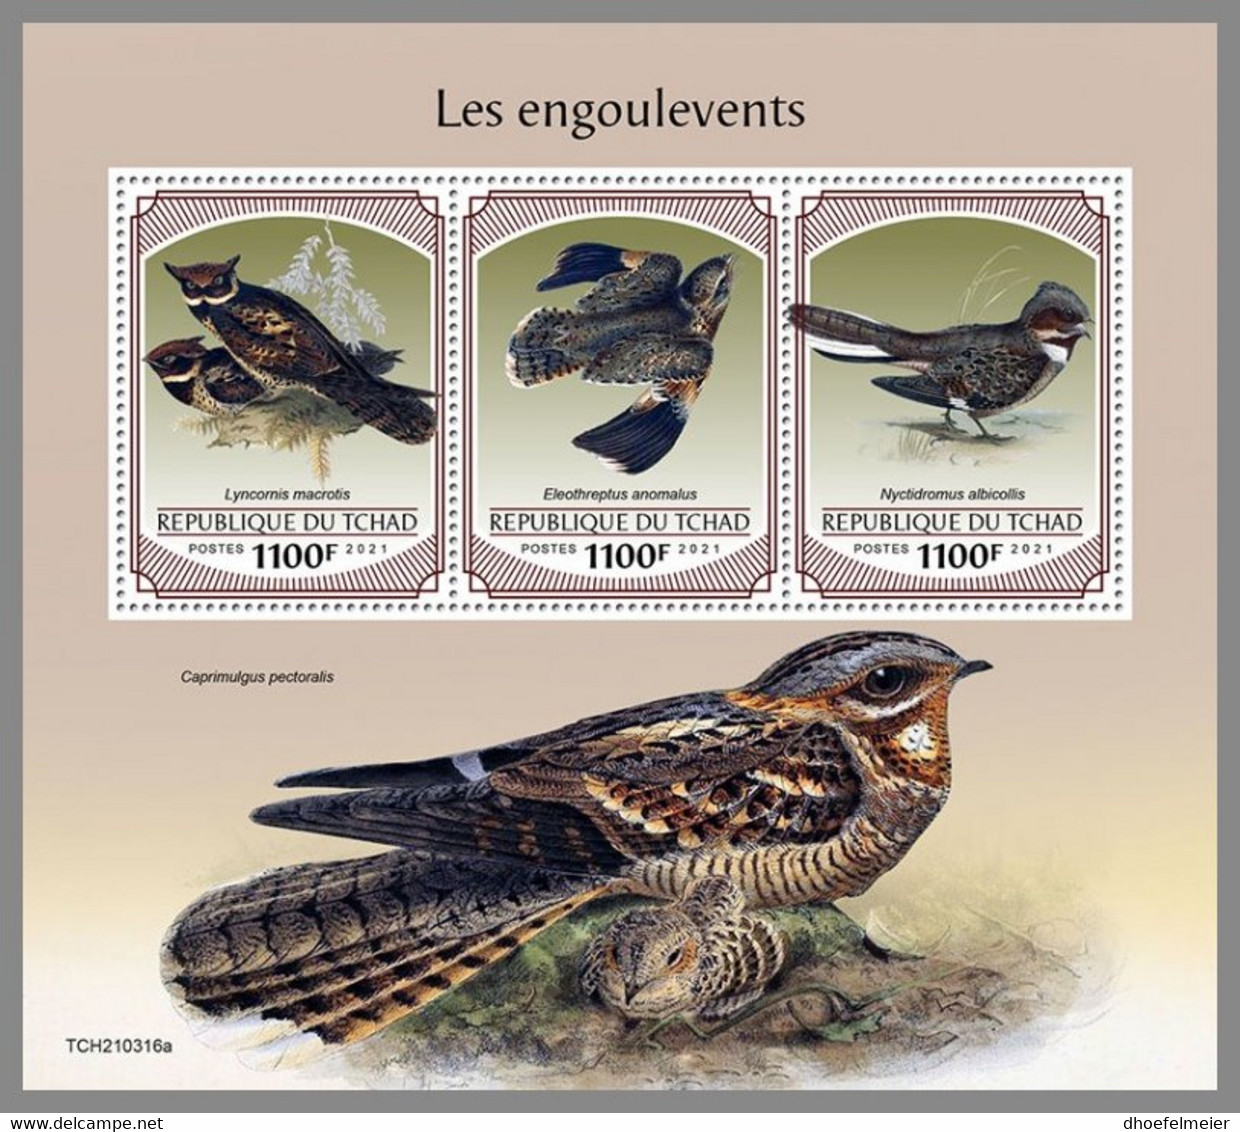 CHAD 2021 MNH Nightjars Nachtschwalben Engoulevents M/S - OFFICIAL ISSUE - DHQ2144 - Golondrinas